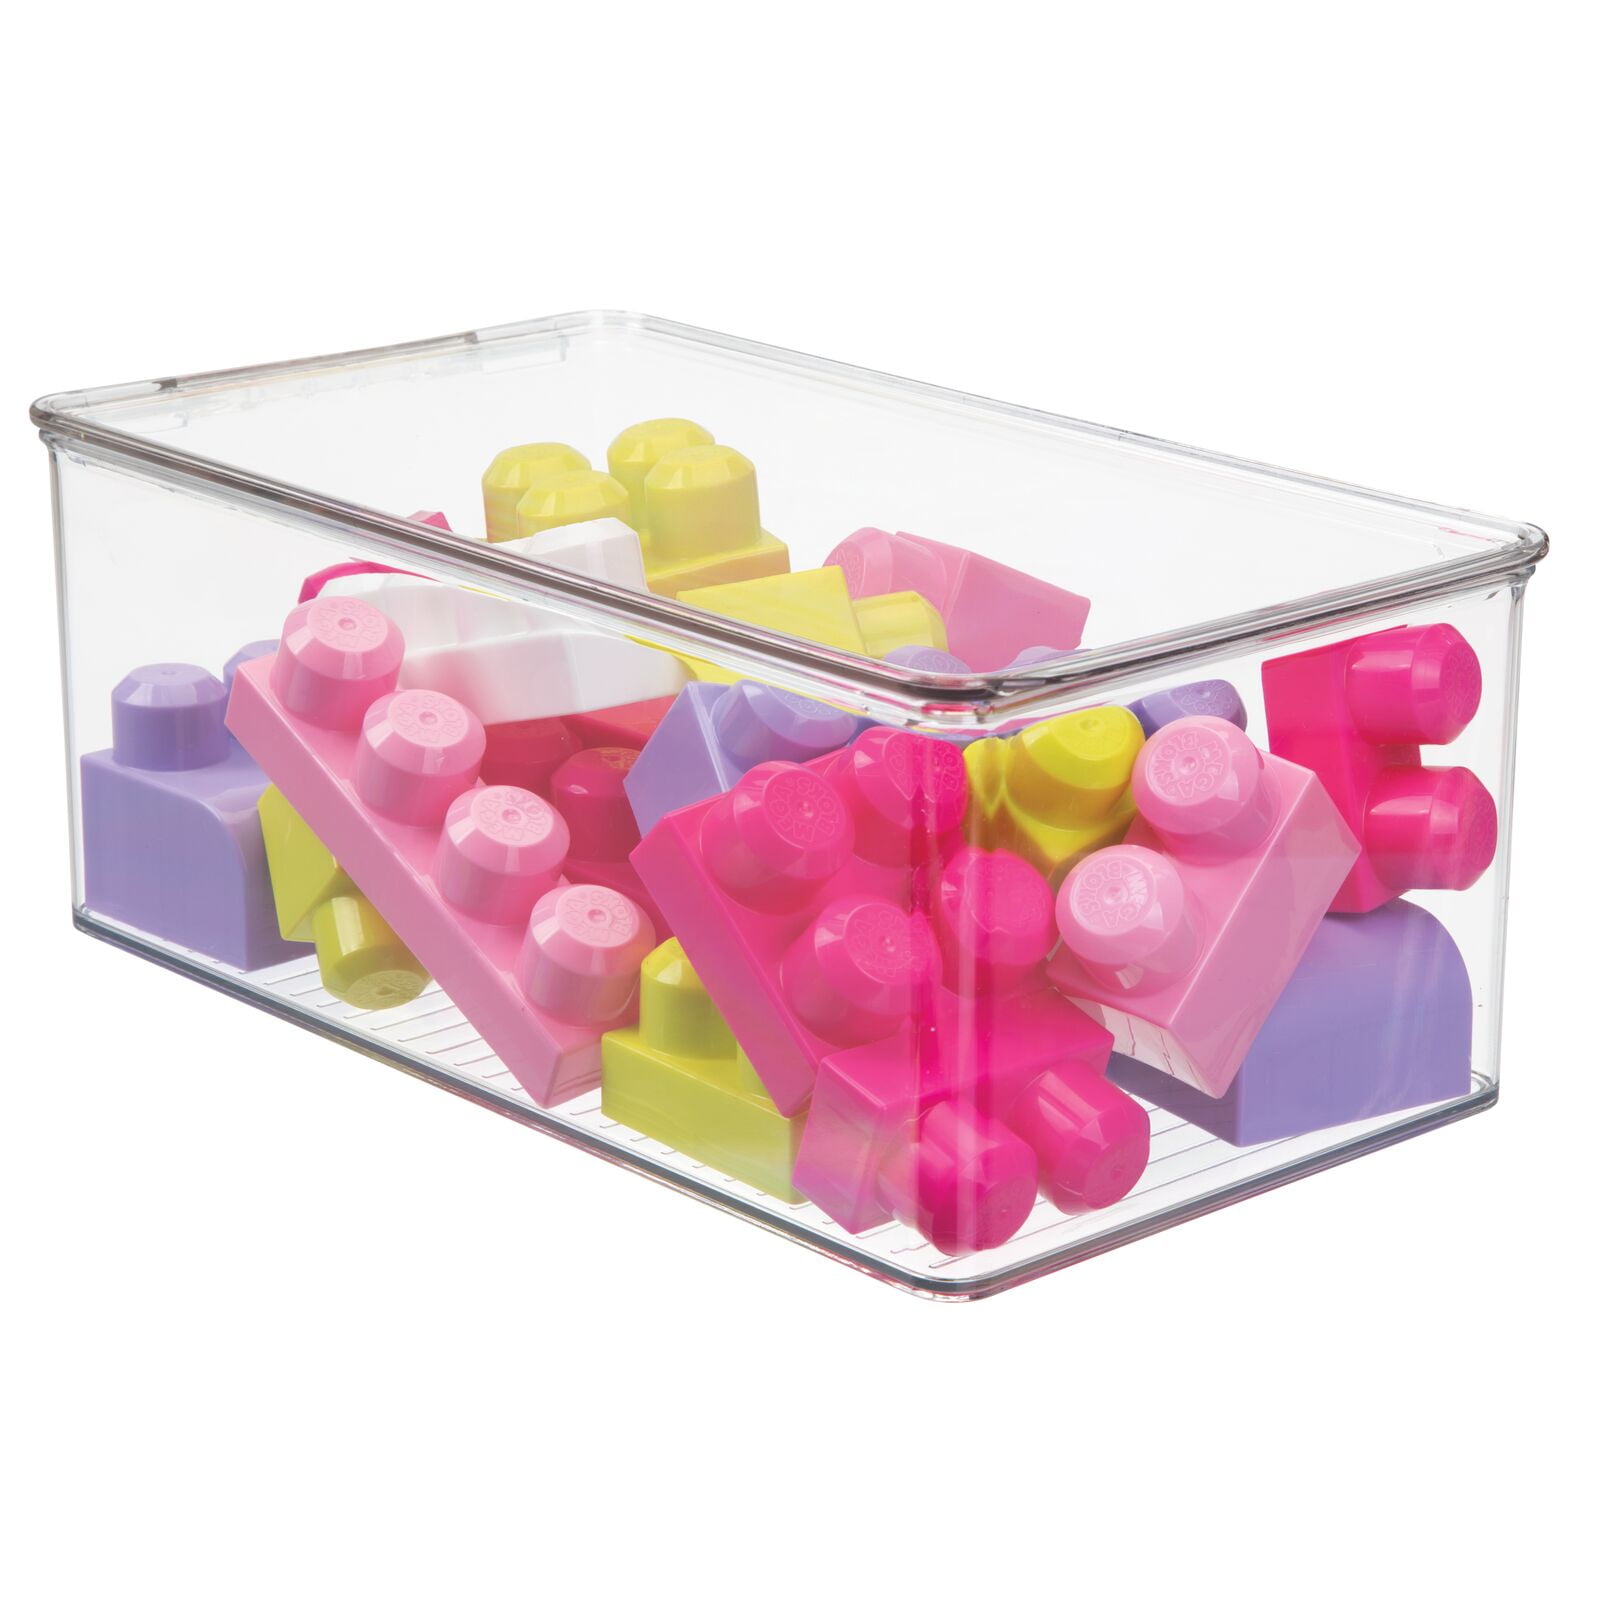 mDesign Plastic Stackable Storage Bin Box with Lid, 4 Pack - 12.75 x 7.25 x  7, Clear